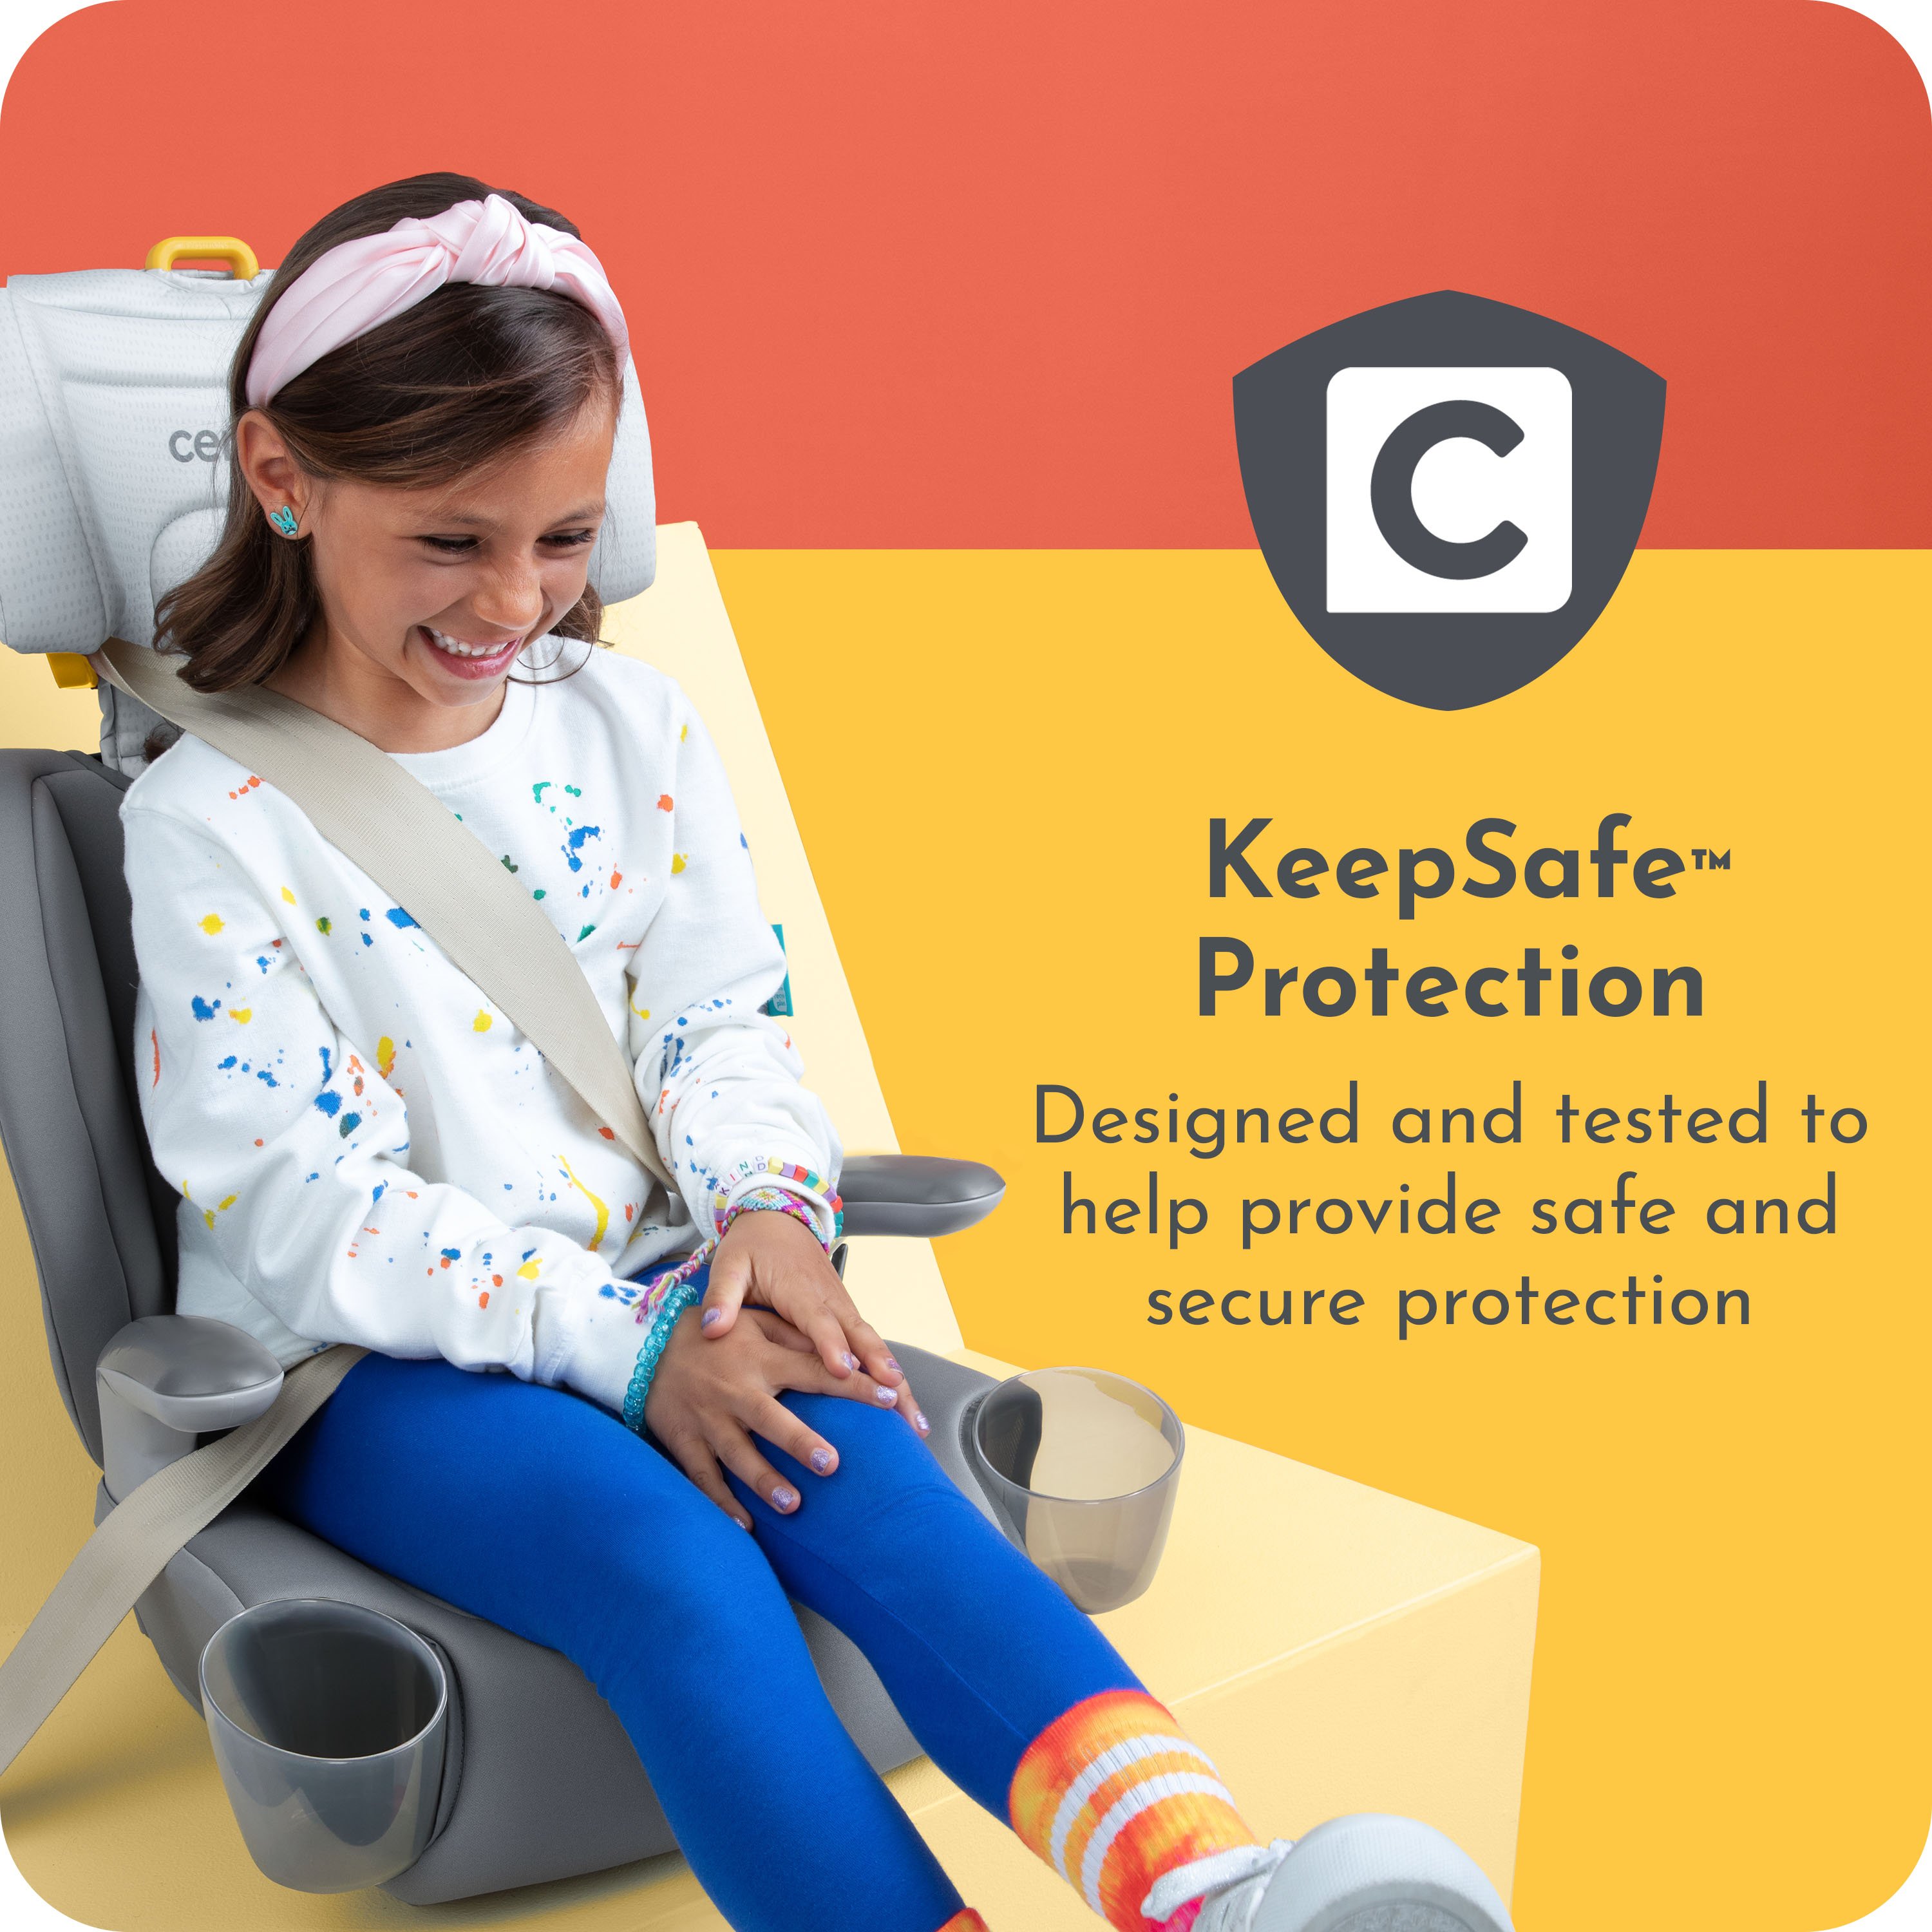 Too old for a booster? Says who? – CarseatBlog